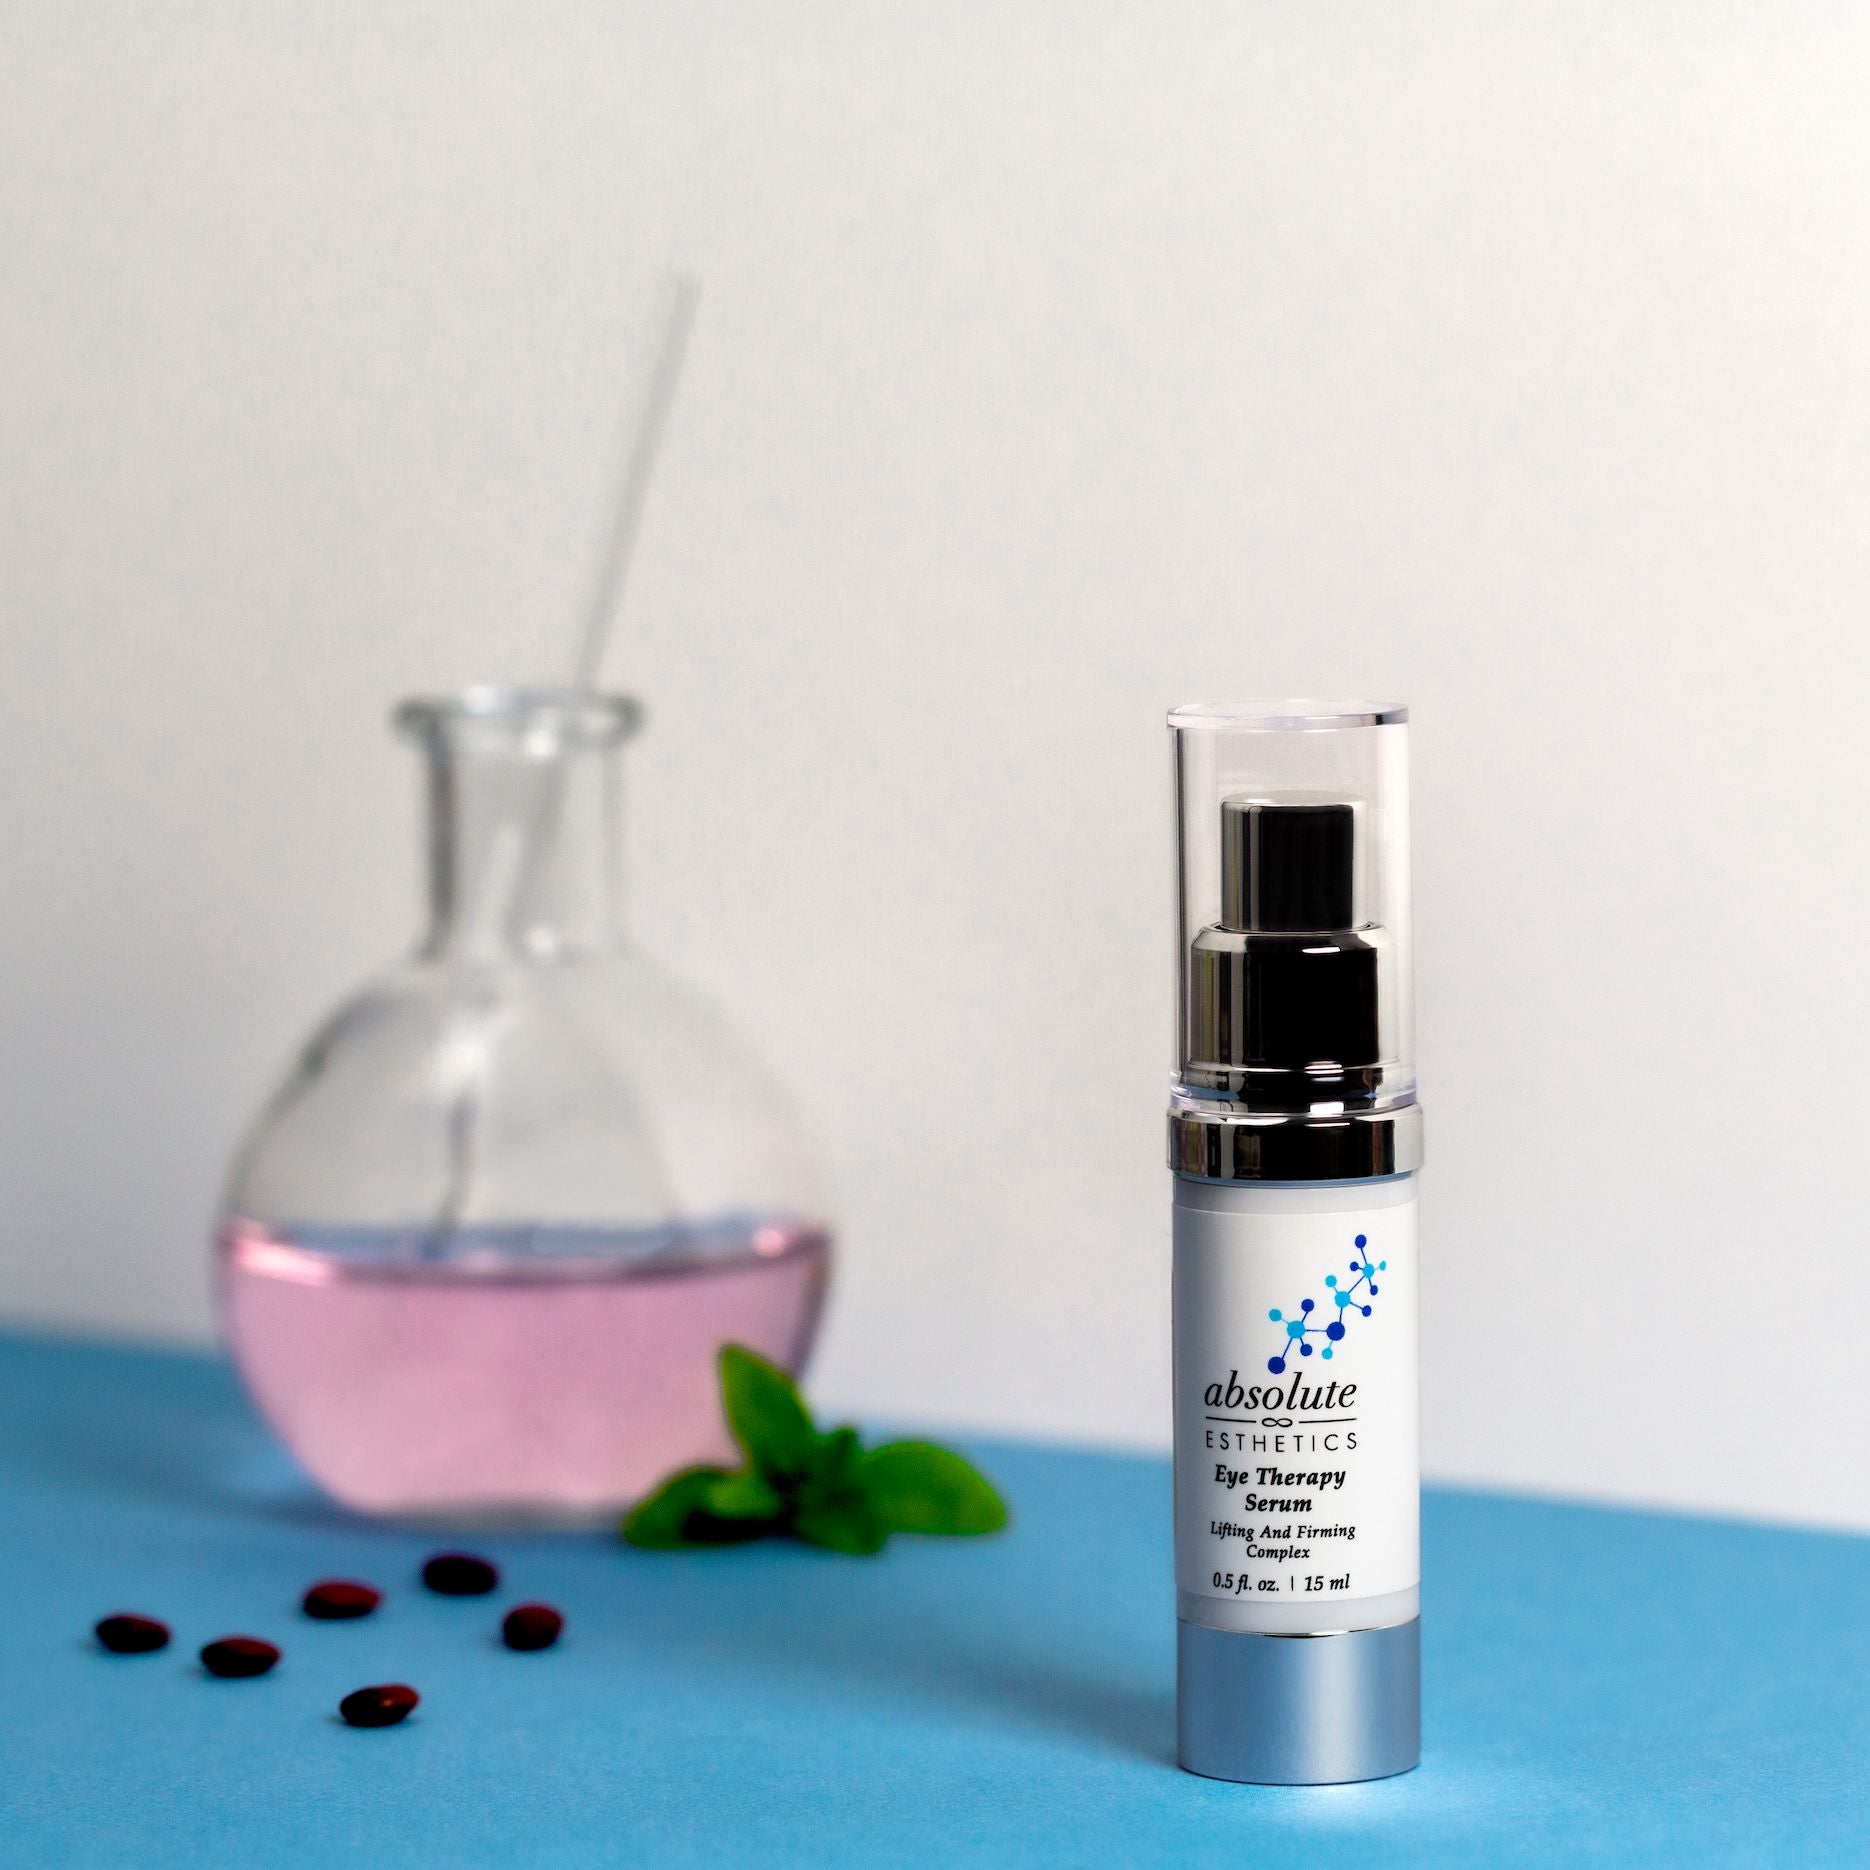 Eye Therapy Serum (Skin Lifting & Firming Complex)